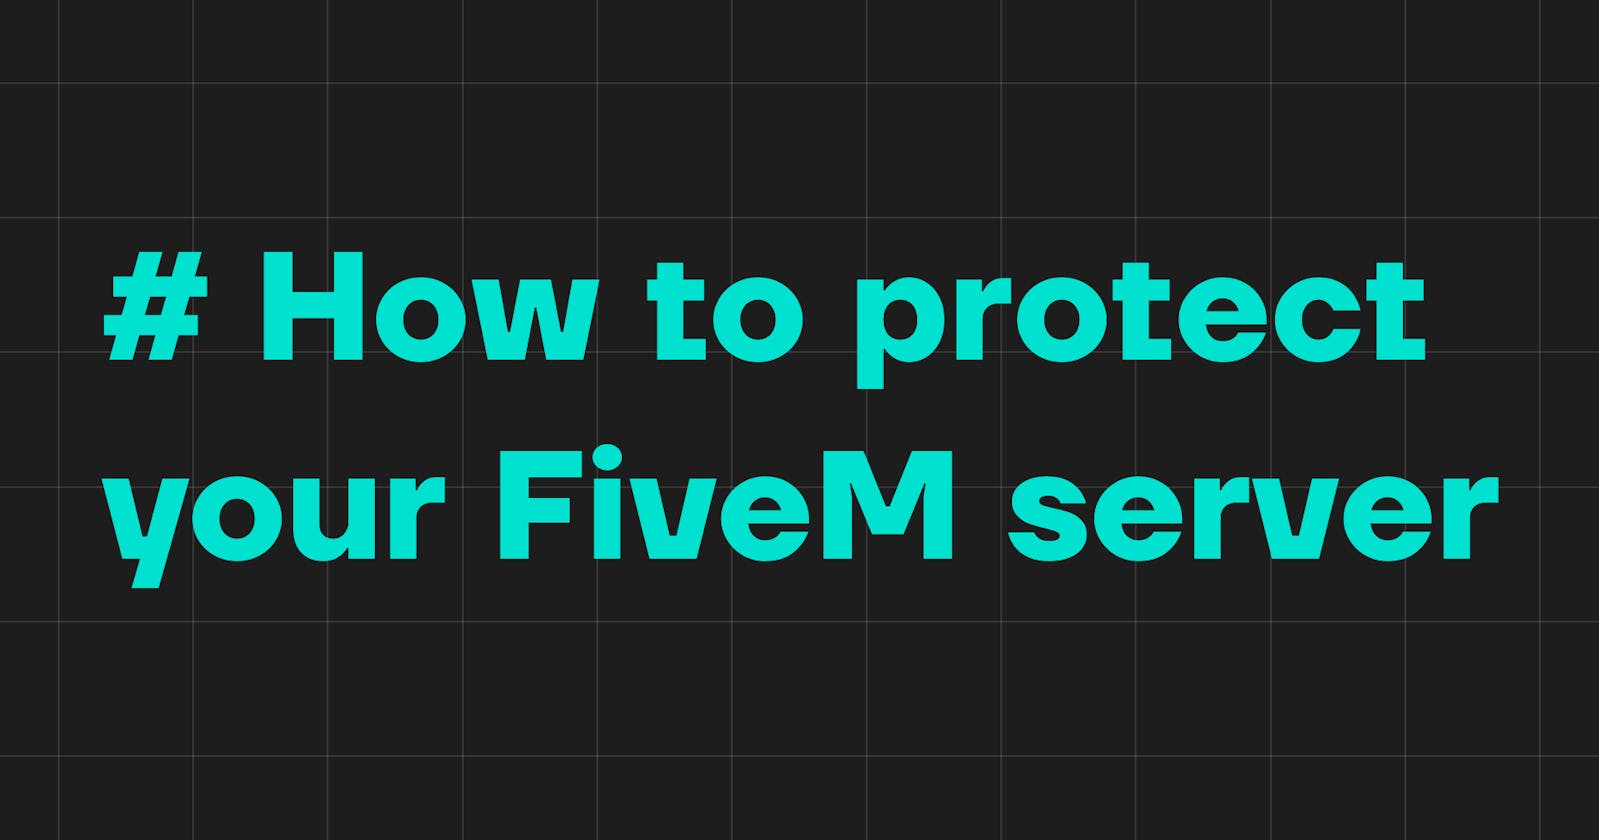 # How to protect your FiveM server (Linux)